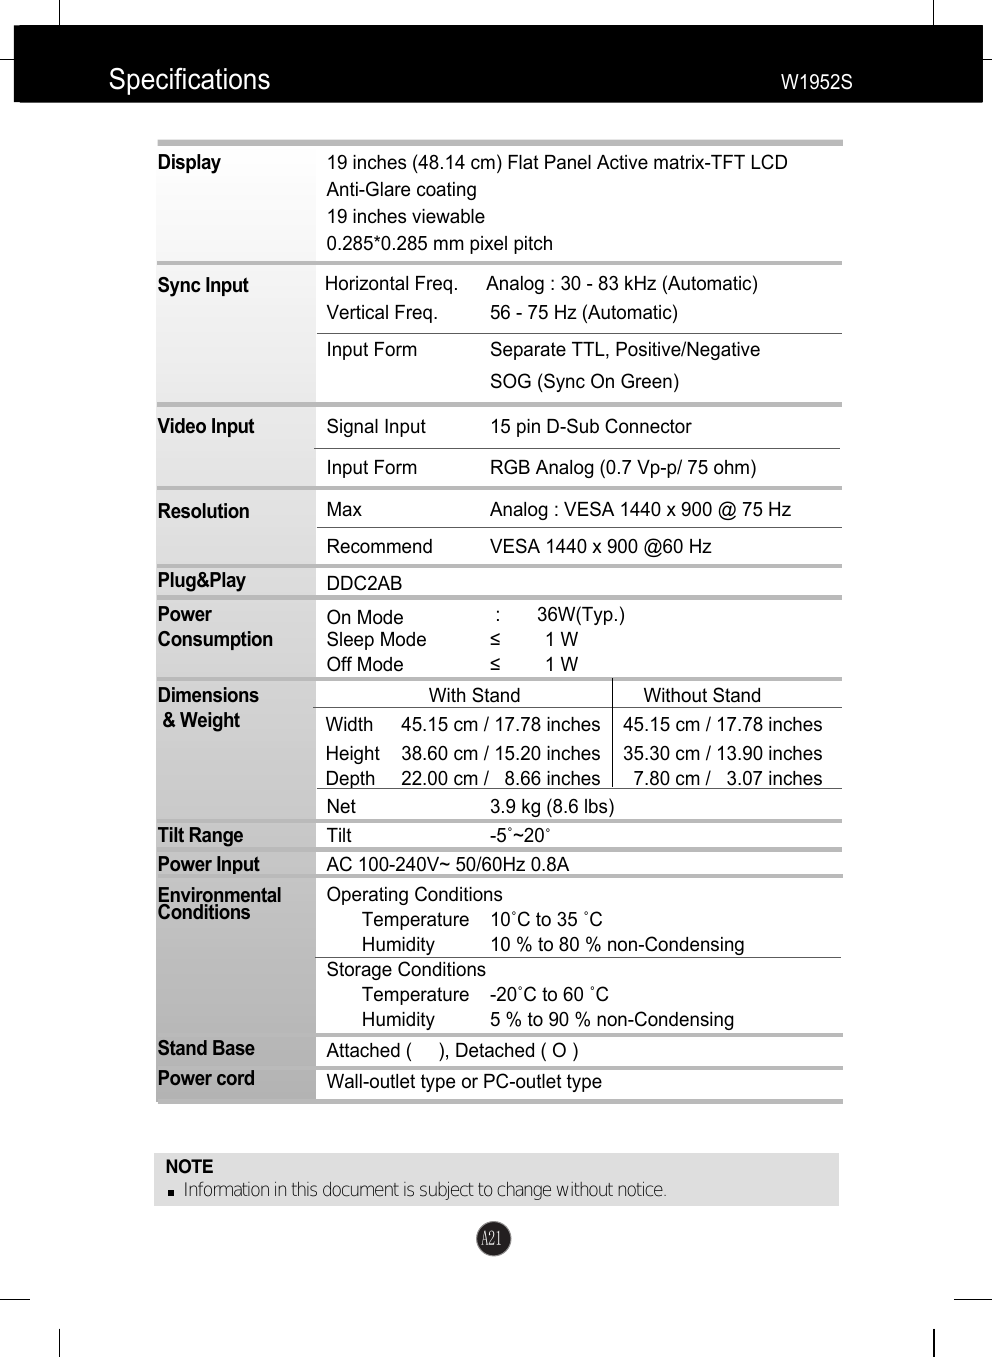 Specifications W1952SNOTEInformation in this document is subject to change without notice.DisplaySync InputVideo InputResolutionPlug&amp;PlayPowerConsumptionDimensions&amp; WeightTilt RangePower InputEnvironmentalConditionsStand BasePower cord 19 inches (48.14 cm) Flat Panel Active matrix-TFT LCD Anti-Glare coating19 inches viewable0.285*0.285 mm pixel pitchHorizontal Freq. Analog : 30 - 83 kHz (Automatic)Vertical Freq. 56 - 75 Hz (Automatic)Input Form Separate TTL, Positive/NegativeSOG (Sync On Green) Signal Input 15 pin D-Sub ConnectorInput Form RGB Analog (0.7 Vp-p/ 75 ohm)Max Analog : VESA 1440 x 900 @ 75 HzRecommend VESA 1440 x 900 @60 HzDDC2ABOn Mode : 36W(Typ.)Sleep Mode ≤ 1 WOff Mode ≤ 1 WWith Stand Without StandNet 3.9 kg (8.6 lbs)Tilt -5˚~20˚AC 100-240V~ 50/60Hz 0.8A Operating ConditionsTemperature 10˚C to 35 ˚CHumidity 10 % to 80 % non-CondensingStorage ConditionsTemperature -20˚C to 60 ˚CHumidity 5 % to 90 % non-CondensingAttached (     ), Detached ( O )Wall-outlet type or PC-outlet typeWidth 45.15 cm / 17.78 inches 45.15 cm / 17.78 inchesHeight 38.60 cm / 15.20 inches 35.30 cm / 13.90 inches Depth 22.00 cm /   8.66 inches 7.80 cm /   3.07 inchesA21